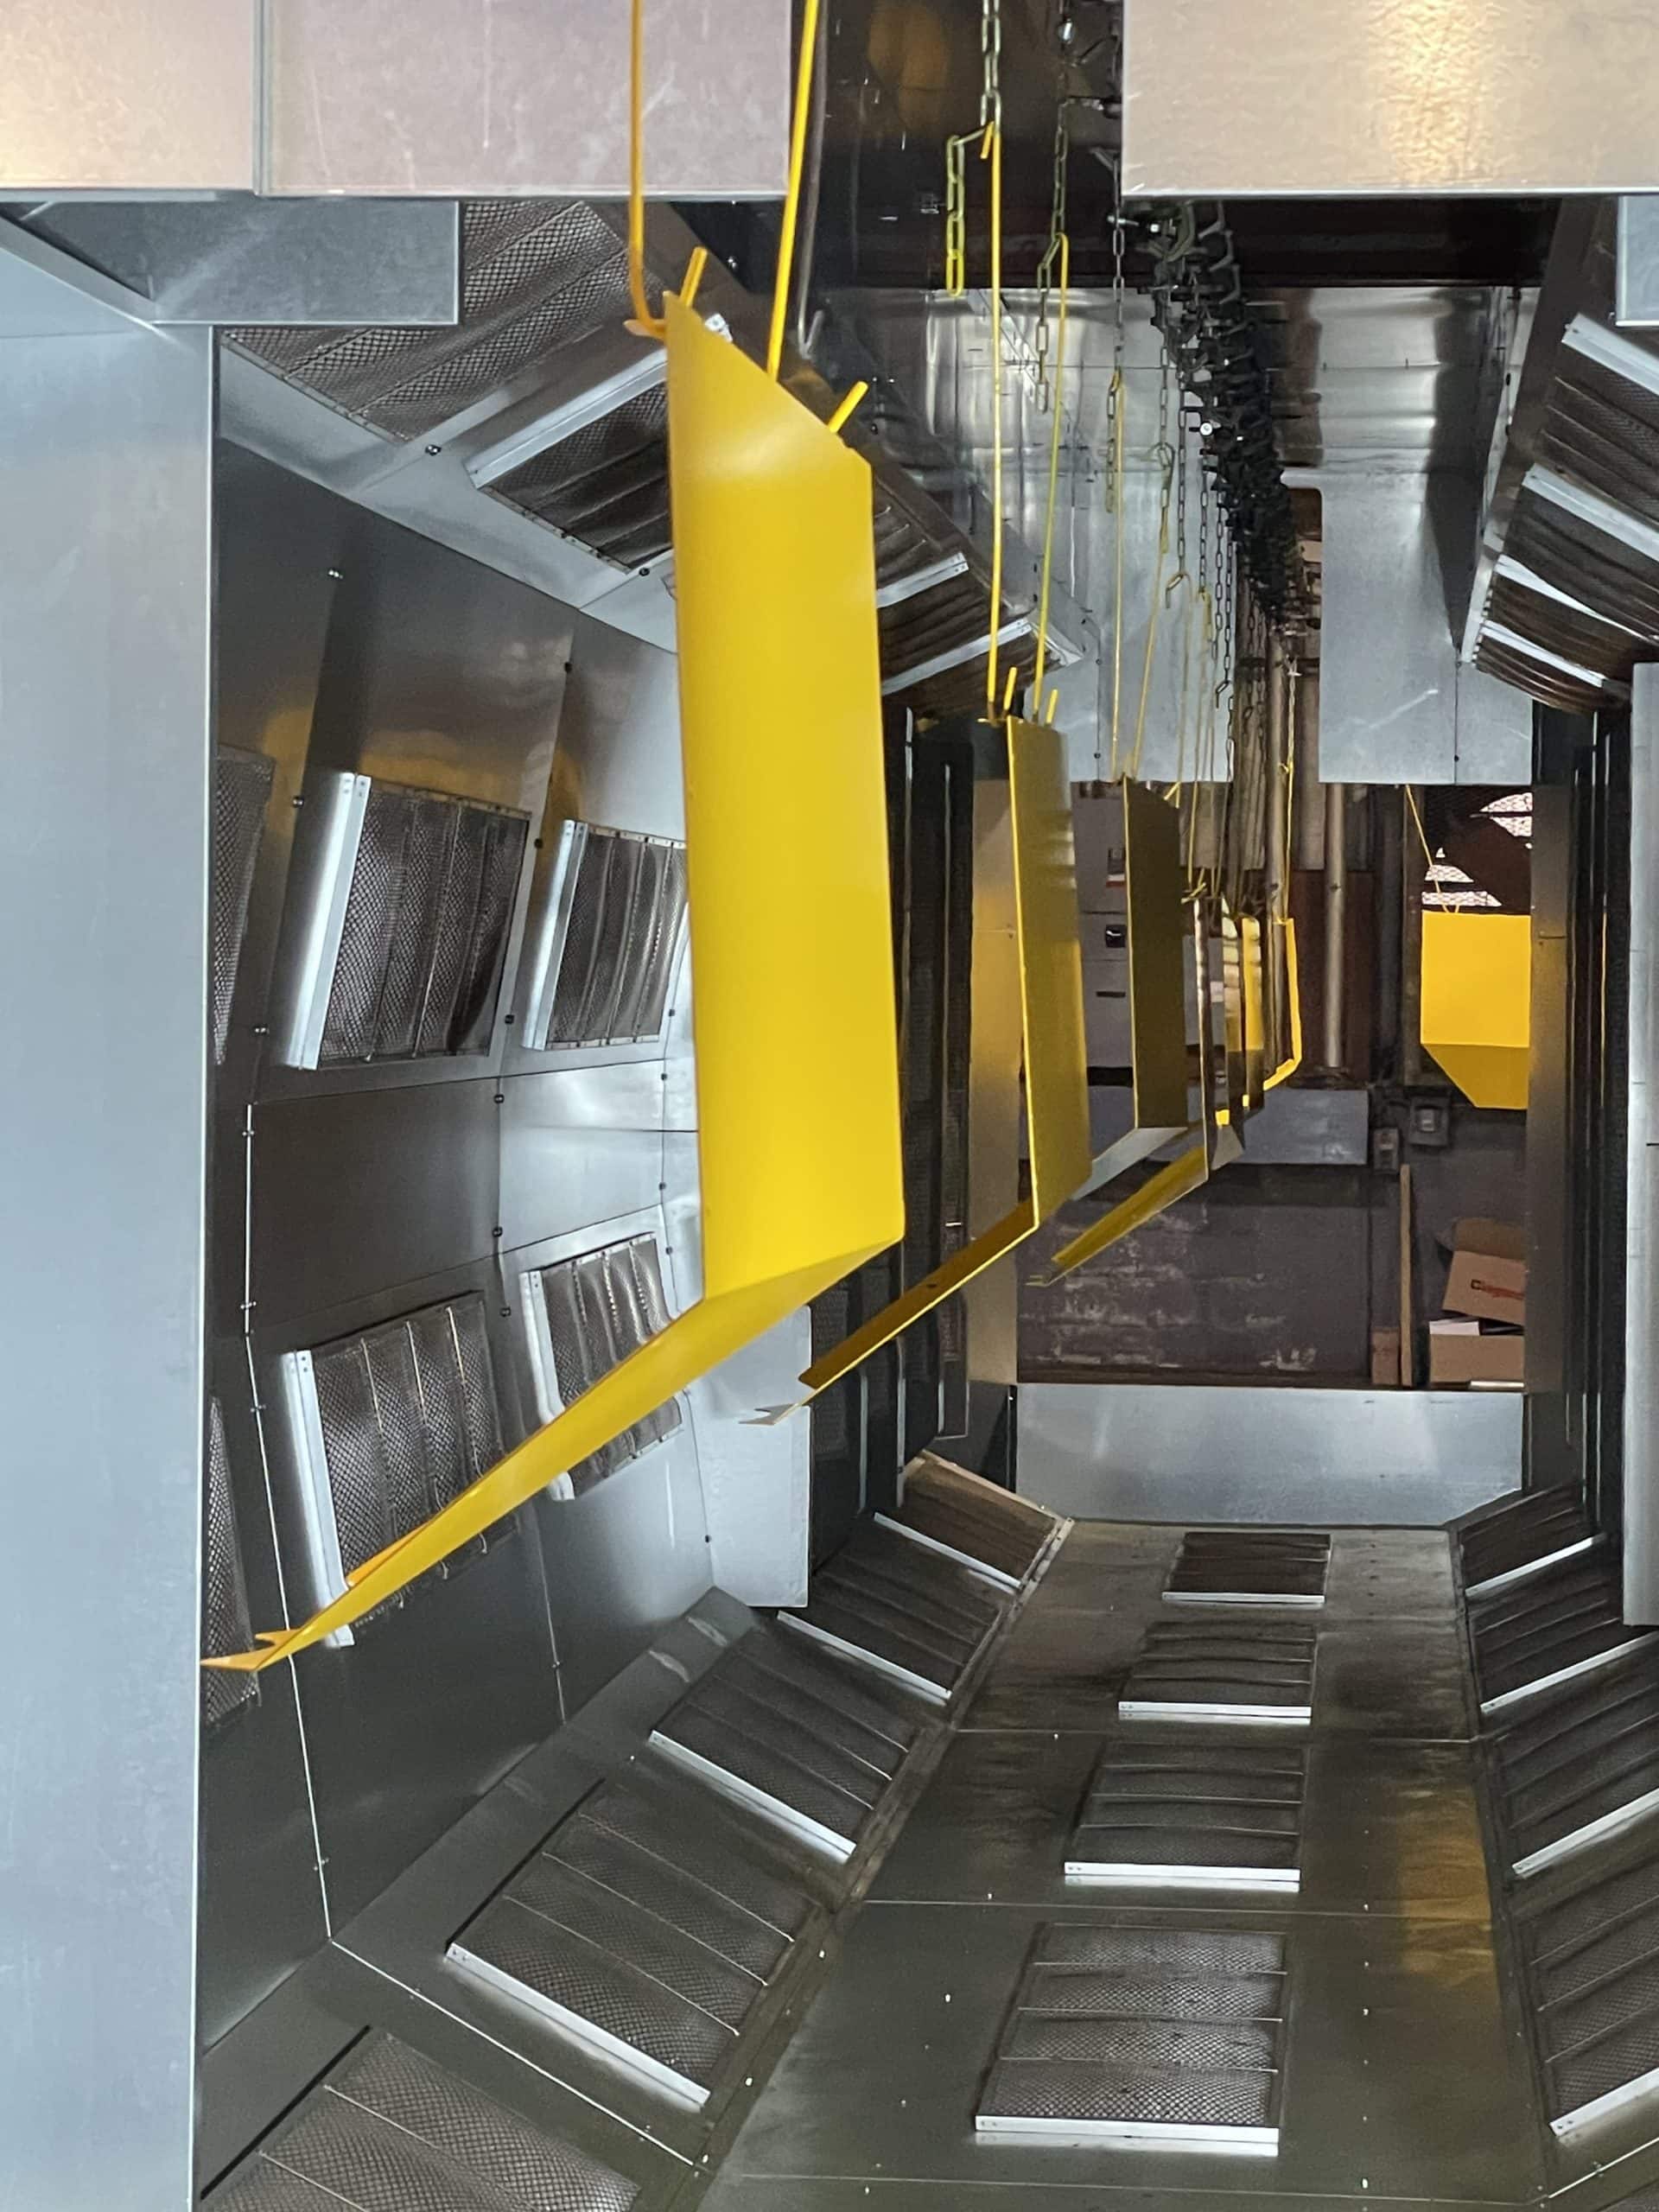 Powder Coating Oven with Yellow Parts